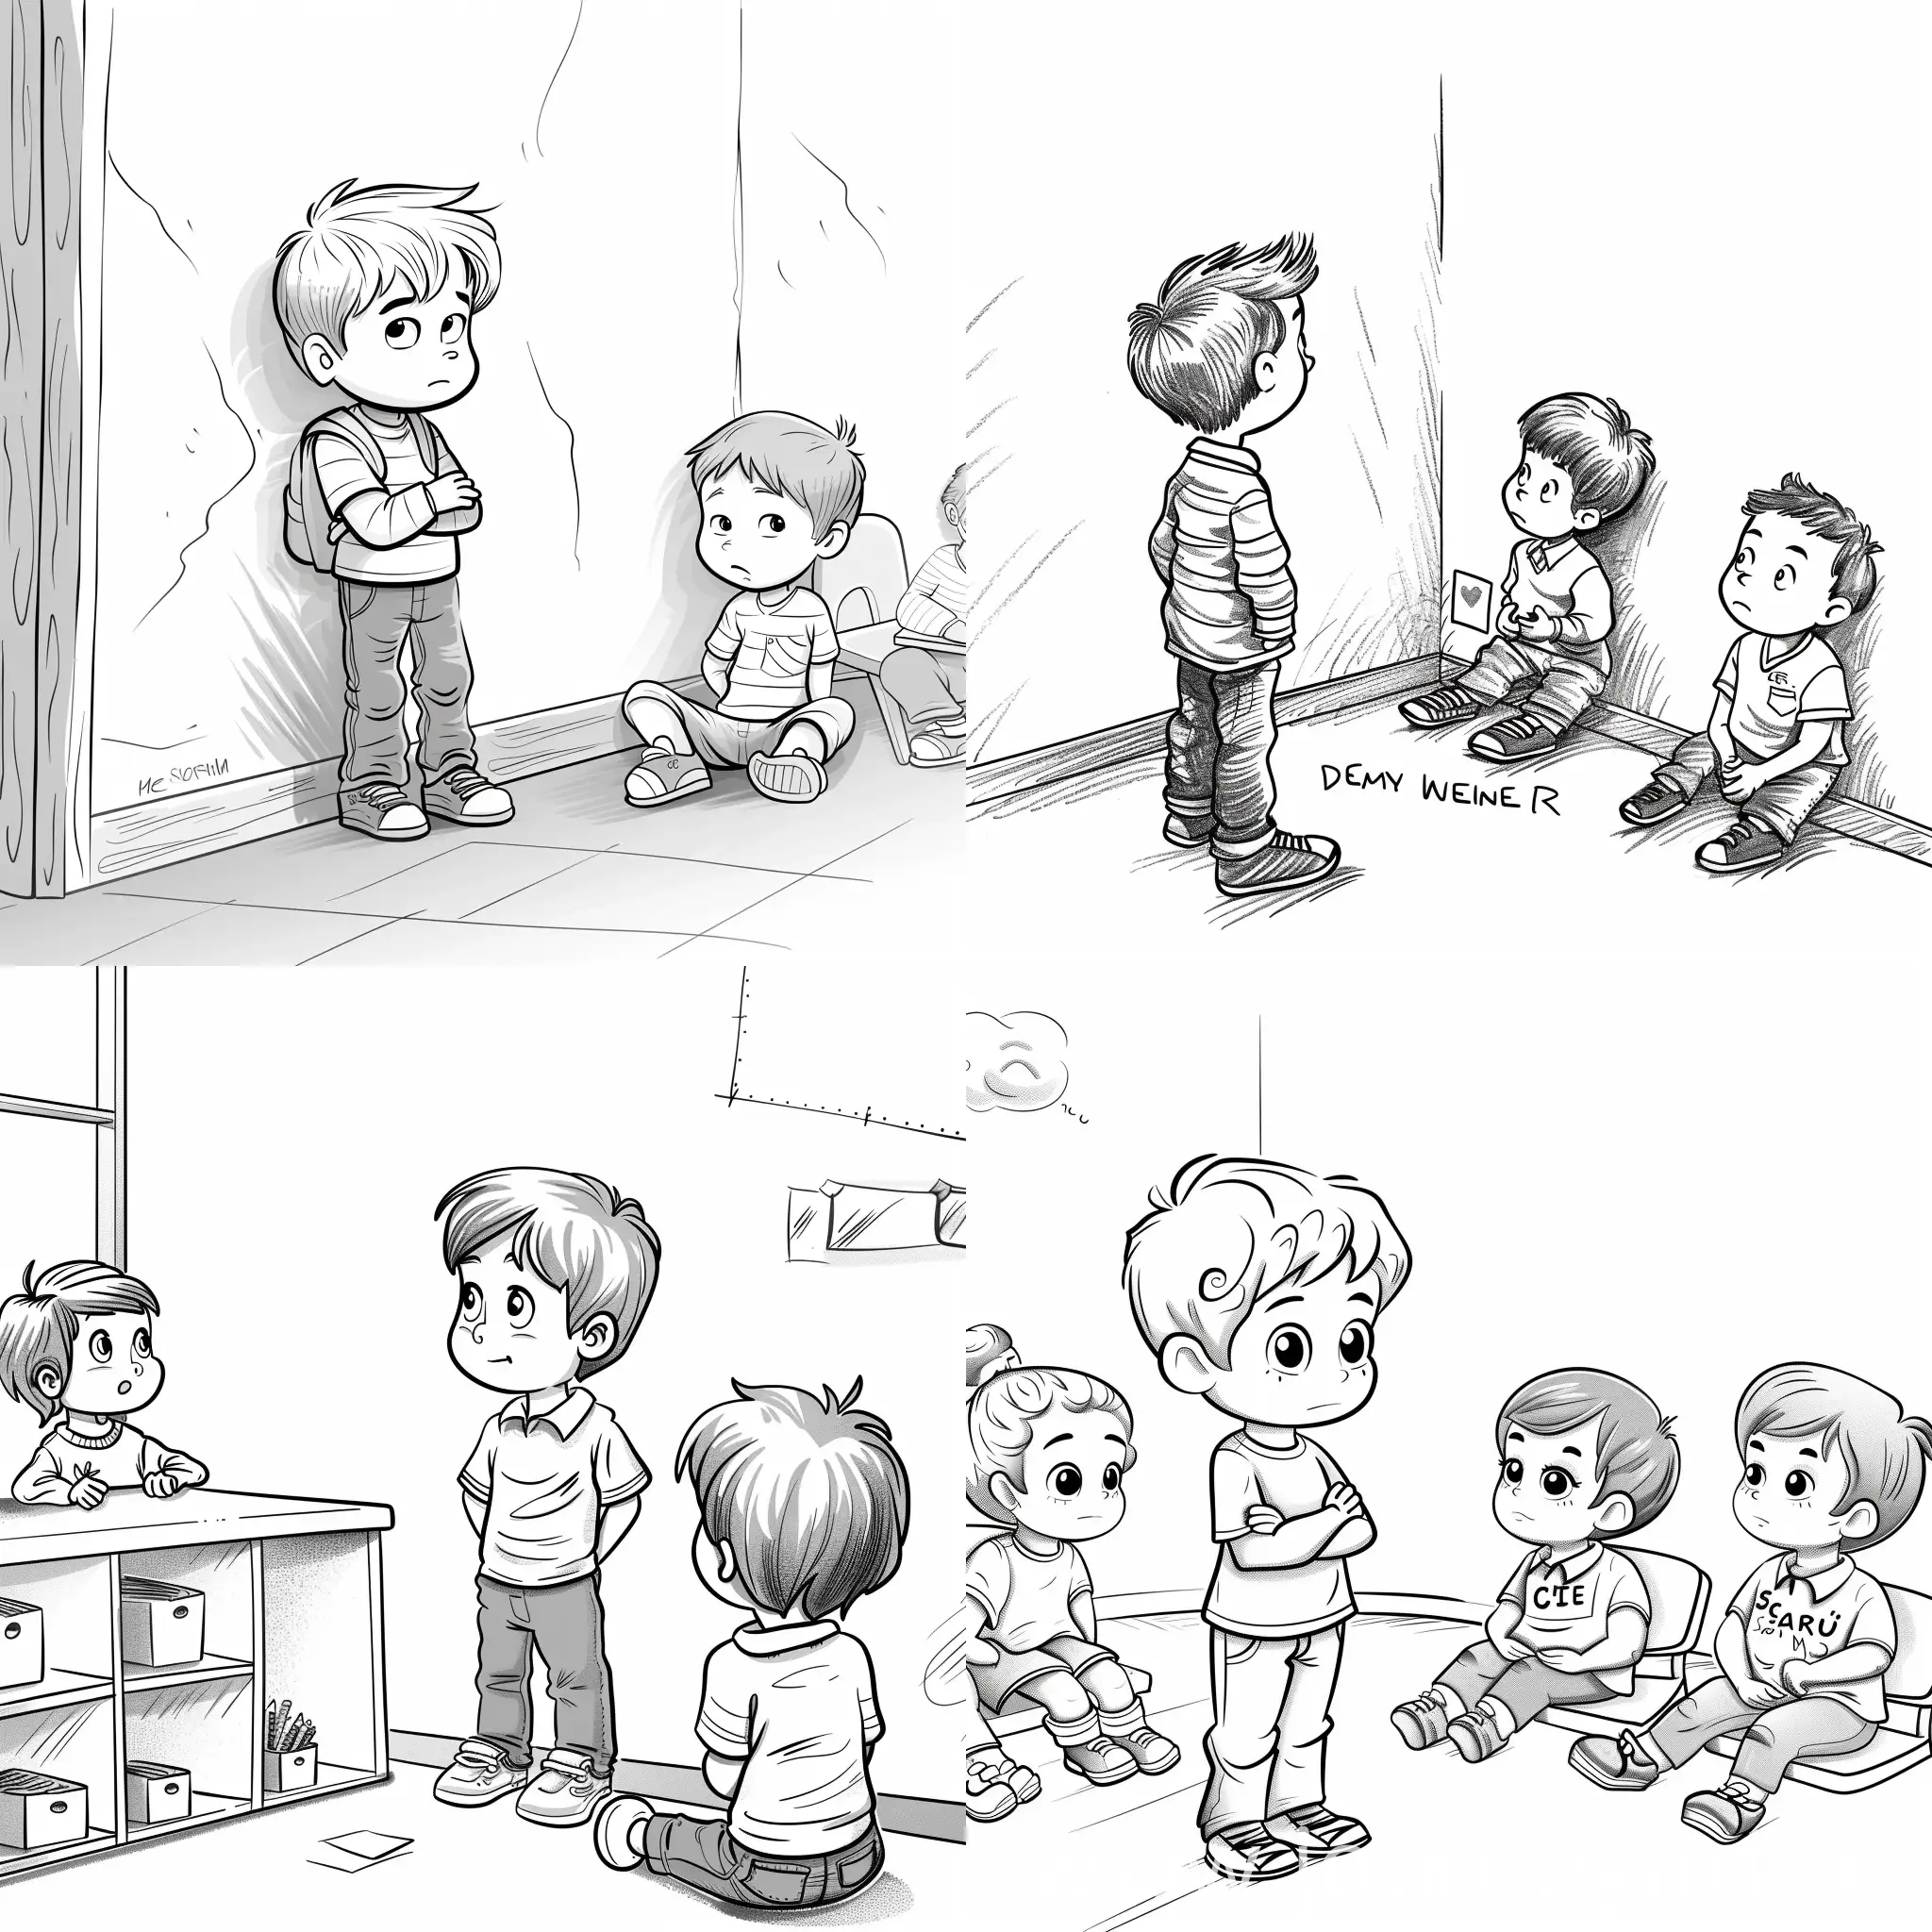 Curious-Little-Boy-Observing-Classmates-with-Coloring-Book-in-Cartoon-Style